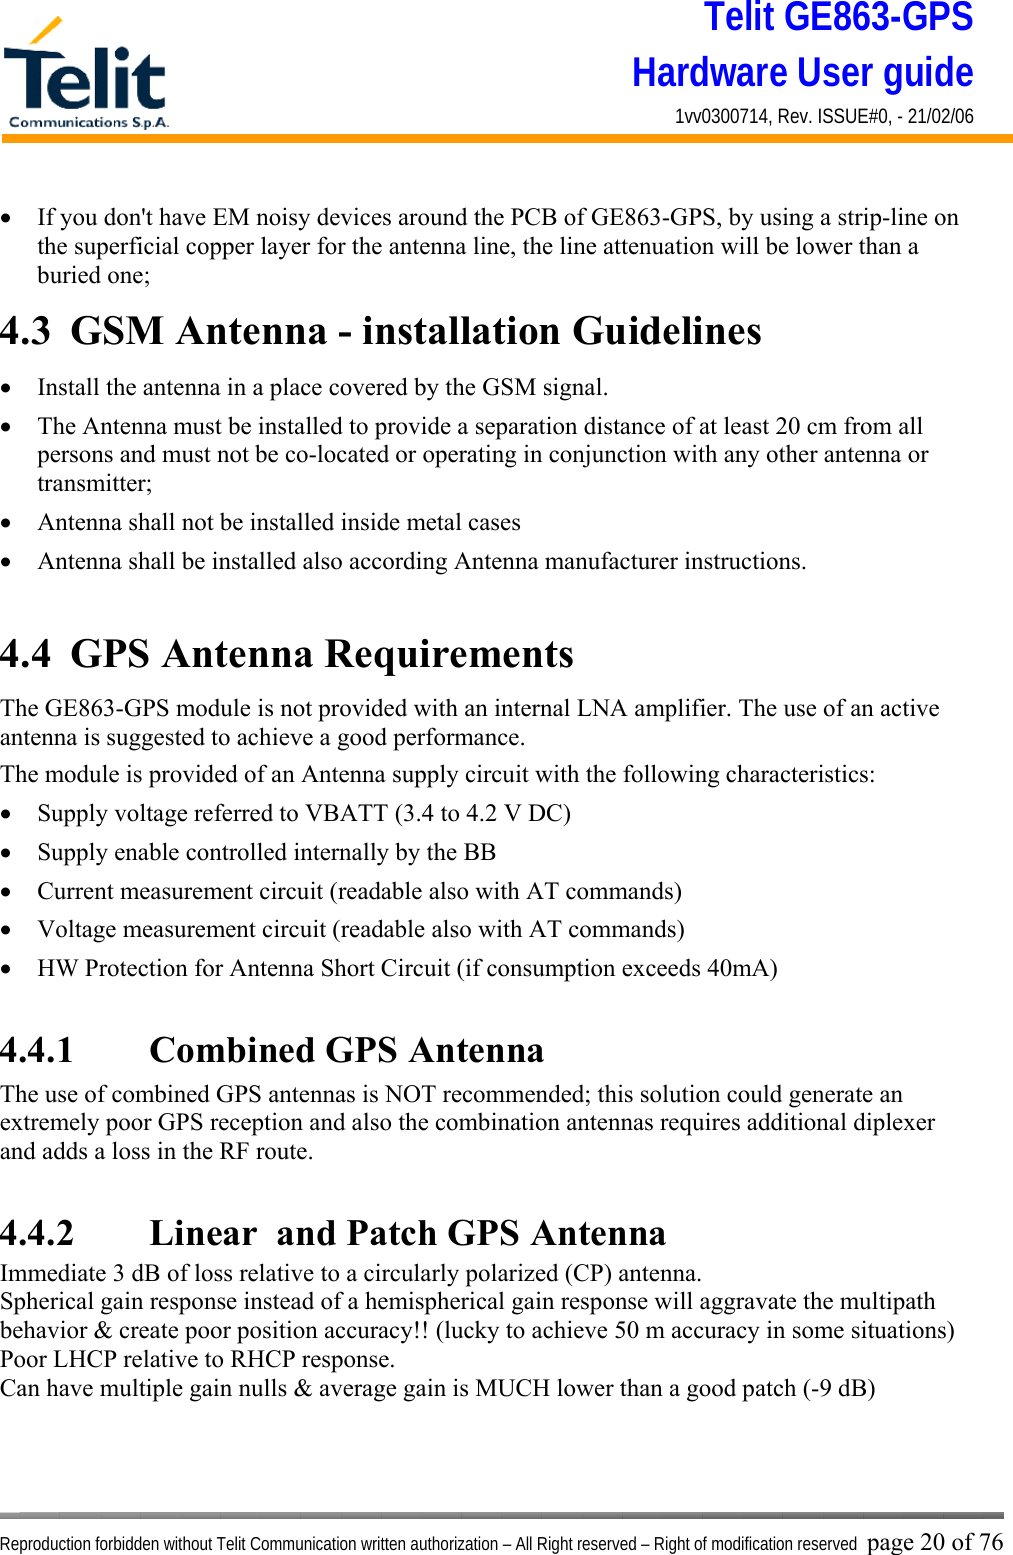 Telit GE863-GPS Hardware User guide 1vv0300714, Rev. ISSUE#0, - 21/02/06    Reproduction forbidden without Telit Communication written authorization – All Right reserved – Right of modification reserved page 20 of 76 •  If you don&apos;t have EM noisy devices around the PCB of GE863-GPS, by using a strip-line on the superficial copper layer for the antenna line, the line attenuation will be lower than a buried one; 4.3  GSM Antenna - installation Guidelines •  Install the antenna in a place covered by the GSM signal. •  The Antenna must be installed to provide a separation distance of at least 20 cm from all persons and must not be co-located or operating in conjunction with any other antenna or transmitter; •  Antenna shall not be installed inside metal cases  •  Antenna shall be installed also according Antenna manufacturer instructions.  4.4  GPS Antenna Requirements The GE863-GPS module is not provided with an internal LNA amplifier. The use of an active antenna is suggested to achieve a good performance. The module is provided of an Antenna supply circuit with the following characteristics: •  Supply voltage referred to VBATT (3.4 to 4.2 V DC) •  Supply enable controlled internally by the BB •  Current measurement circuit (readable also with AT commands) •  Voltage measurement circuit (readable also with AT commands) •  HW Protection for Antenna Short Circuit (if consumption exceeds 40mA)  4.4.1   Combined GPS Antenna  The use of combined GPS antennas is NOT recommended; this solution could generate an extremely poor GPS reception and also the combination antennas requires additional diplexer and adds a loss in the RF route.  4.4.2   Linear  and Patch GPS Antenna Immediate 3 dB of loss relative to a circularly polarized (CP) antenna. Spherical gain response instead of a hemispherical gain response will aggravate the multipath behavior &amp; create poor position accuracy!! (lucky to achieve 50 m accuracy in some situations) Poor LHCP relative to RHCP response. Can have multiple gain nulls &amp; average gain is MUCH lower than a good patch (-9 dB) 